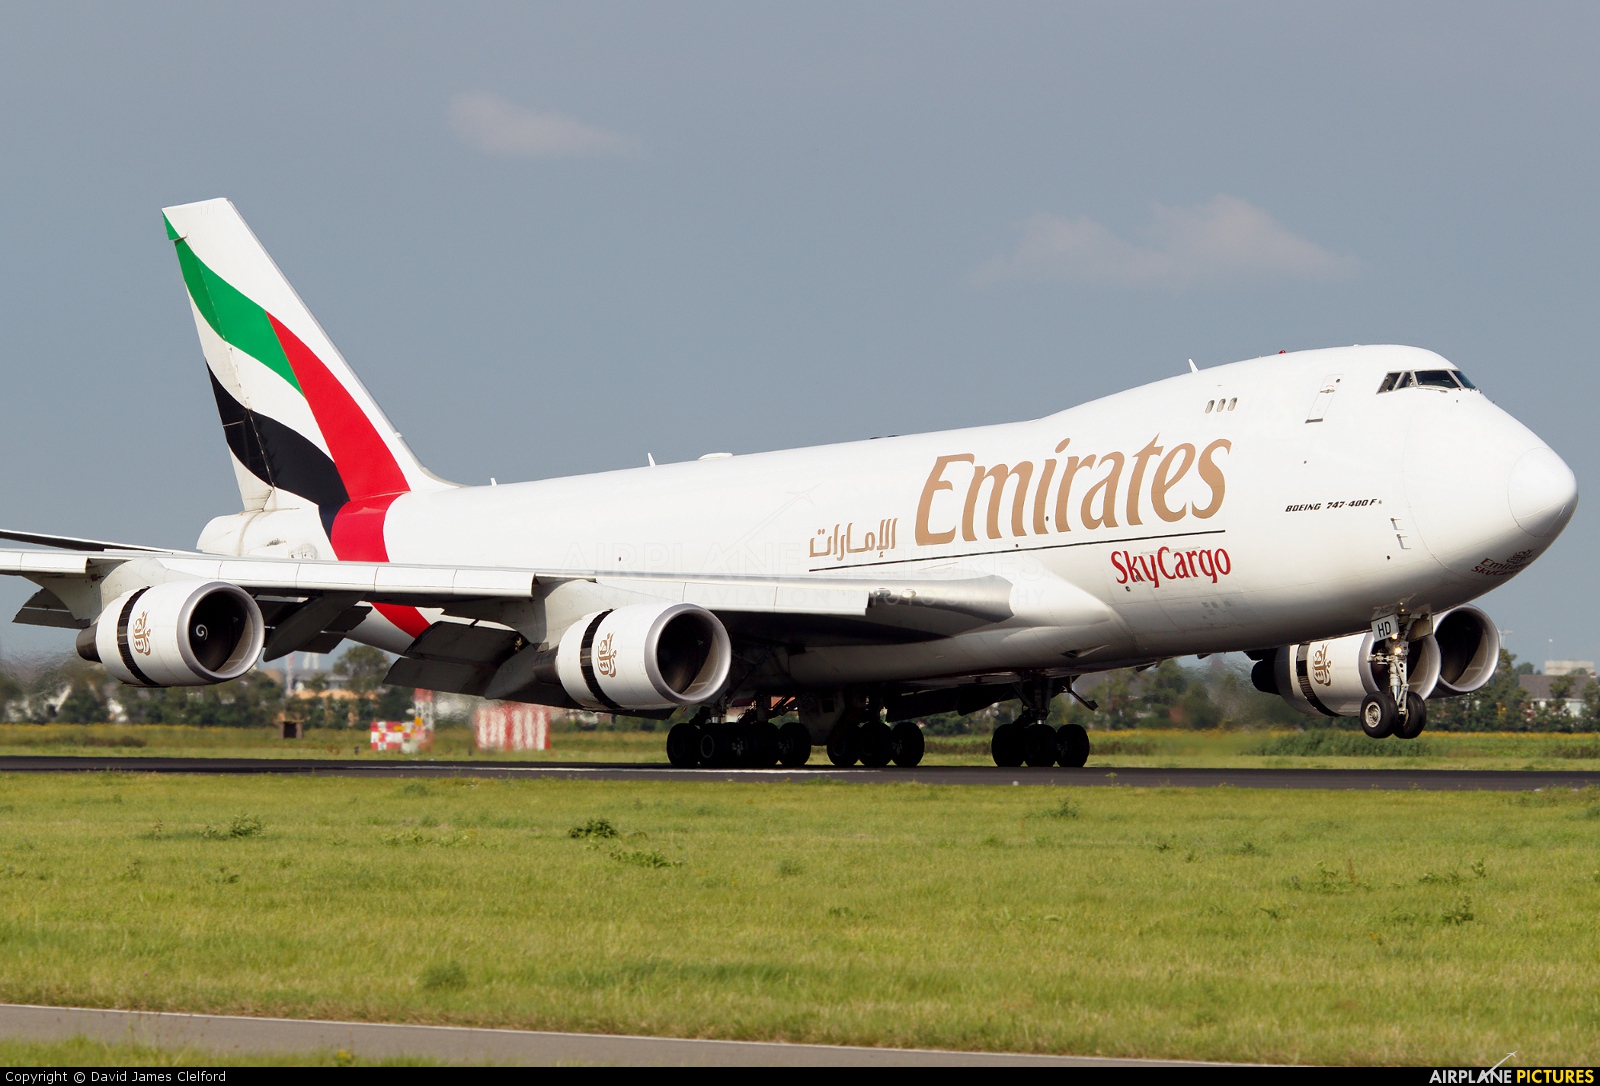 Emirates Sky Cargo OO-THD aircraft at Amsterdam - Schiphol